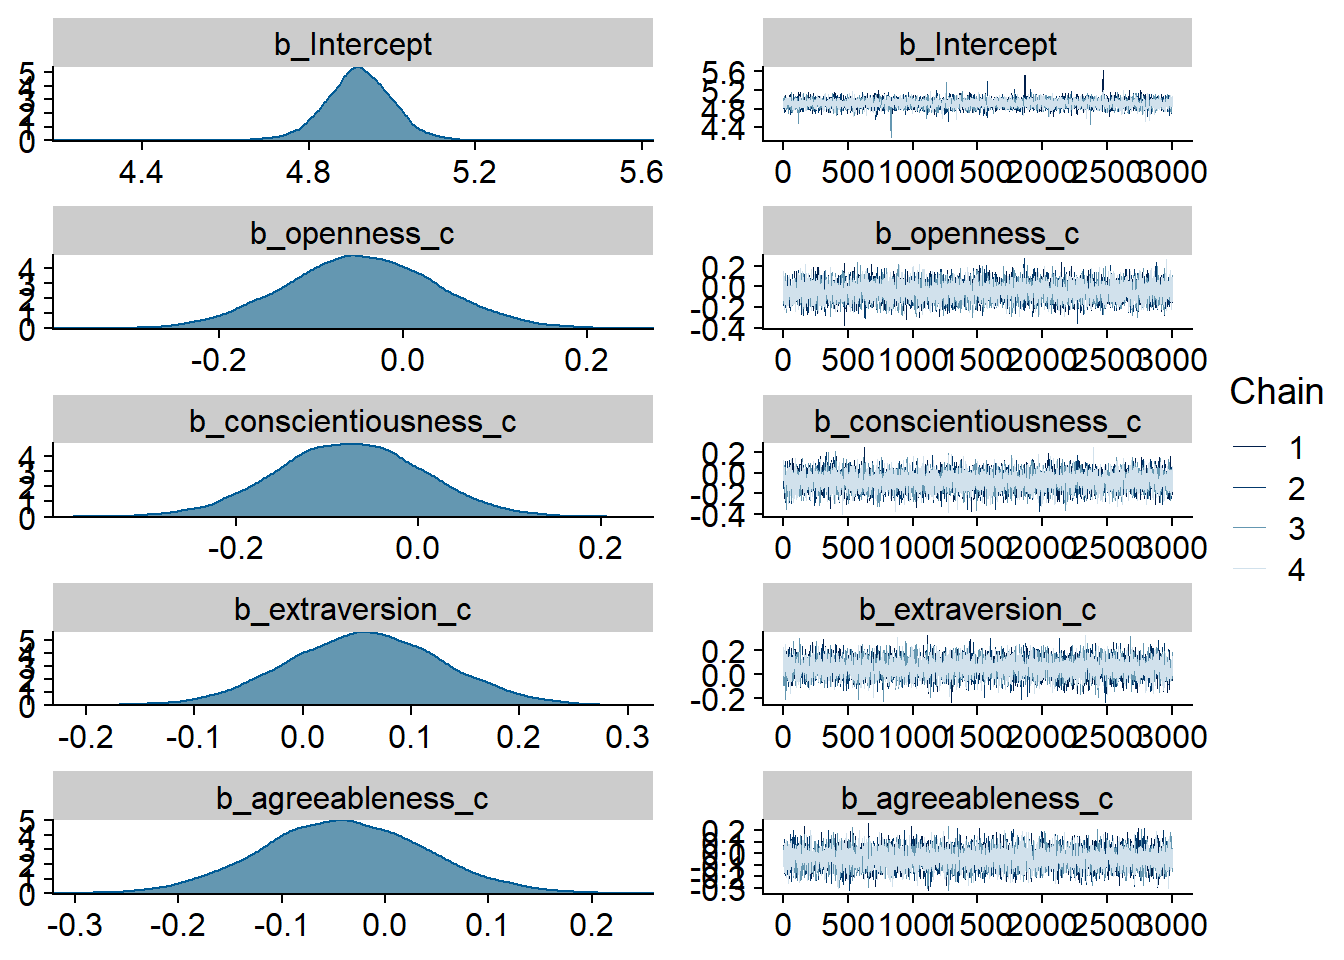 Traceplots and posterior distributions for Model 2